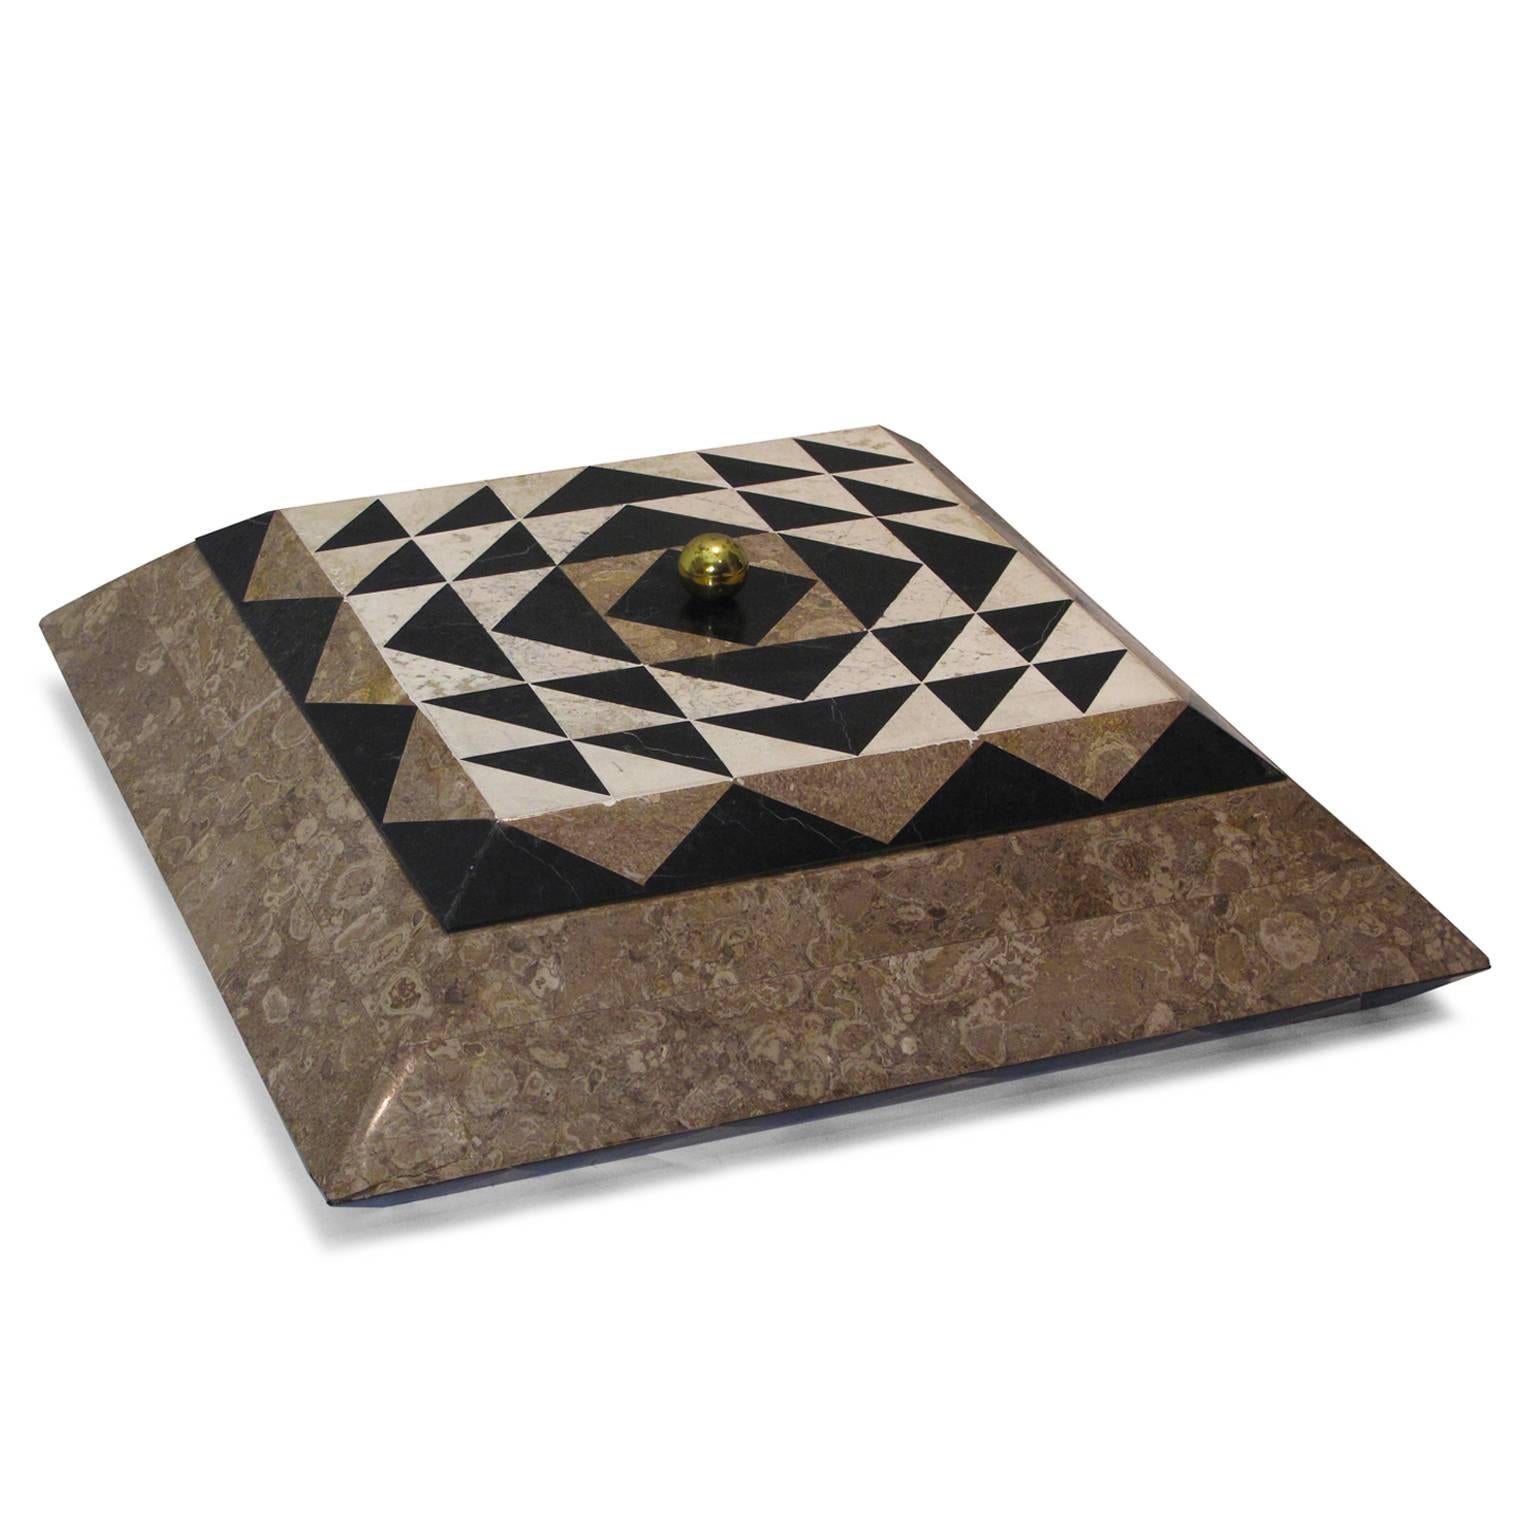 Maitland-Smith tessellated stone box with checkerboard lid.